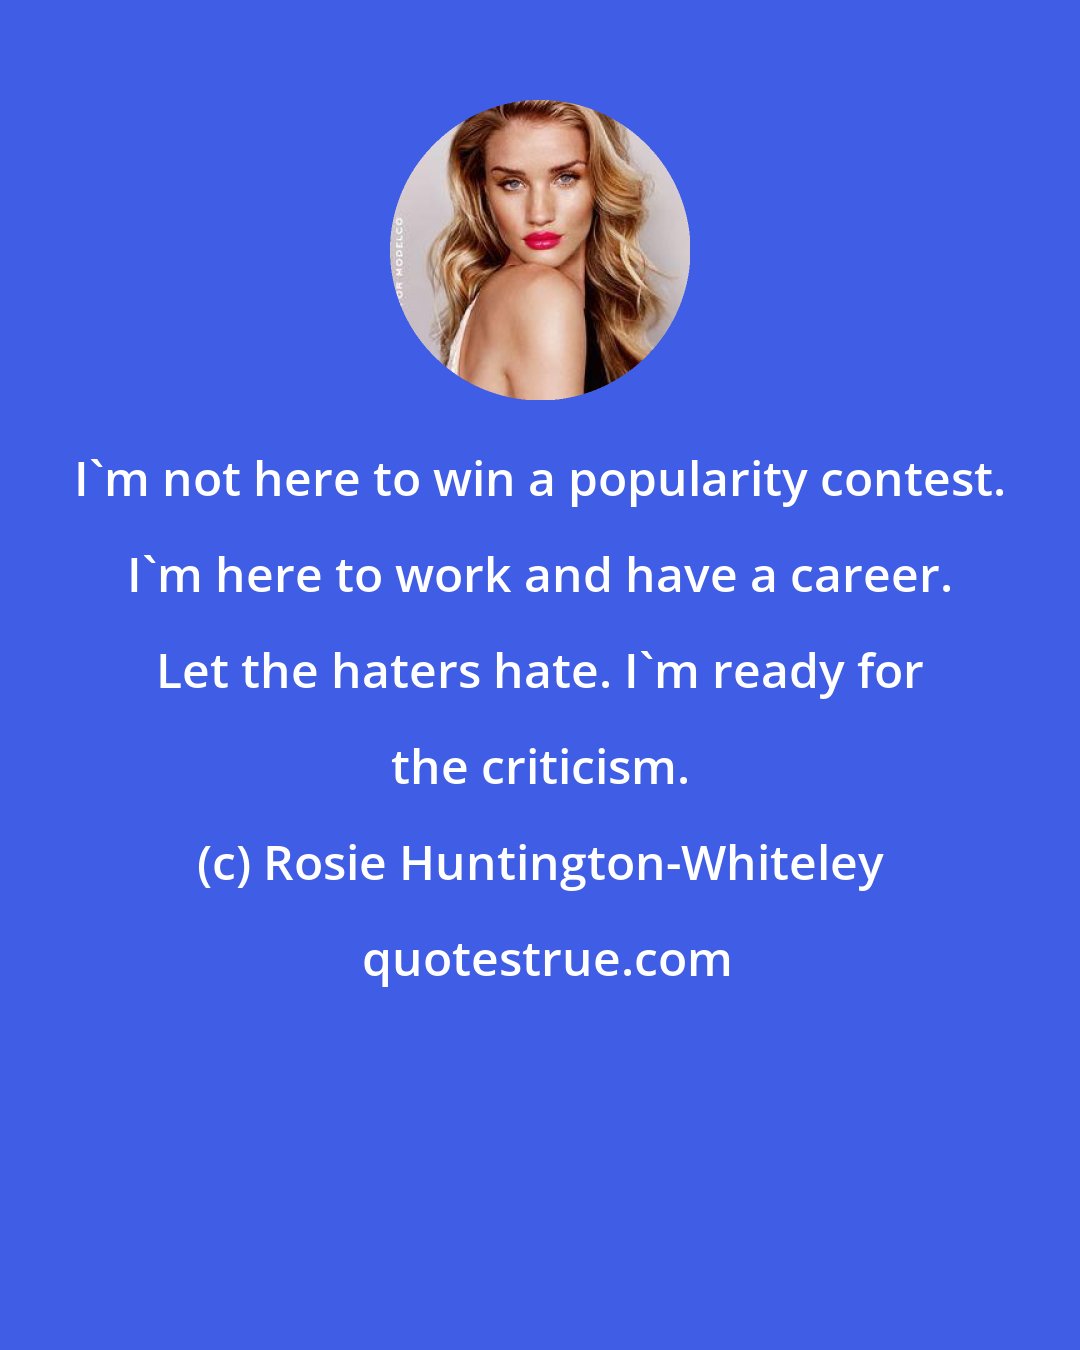 Rosie Huntington-Whiteley: I'm not here to win a popularity contest. I'm here to work and have a career. Let the haters hate. I'm ready for the criticism.